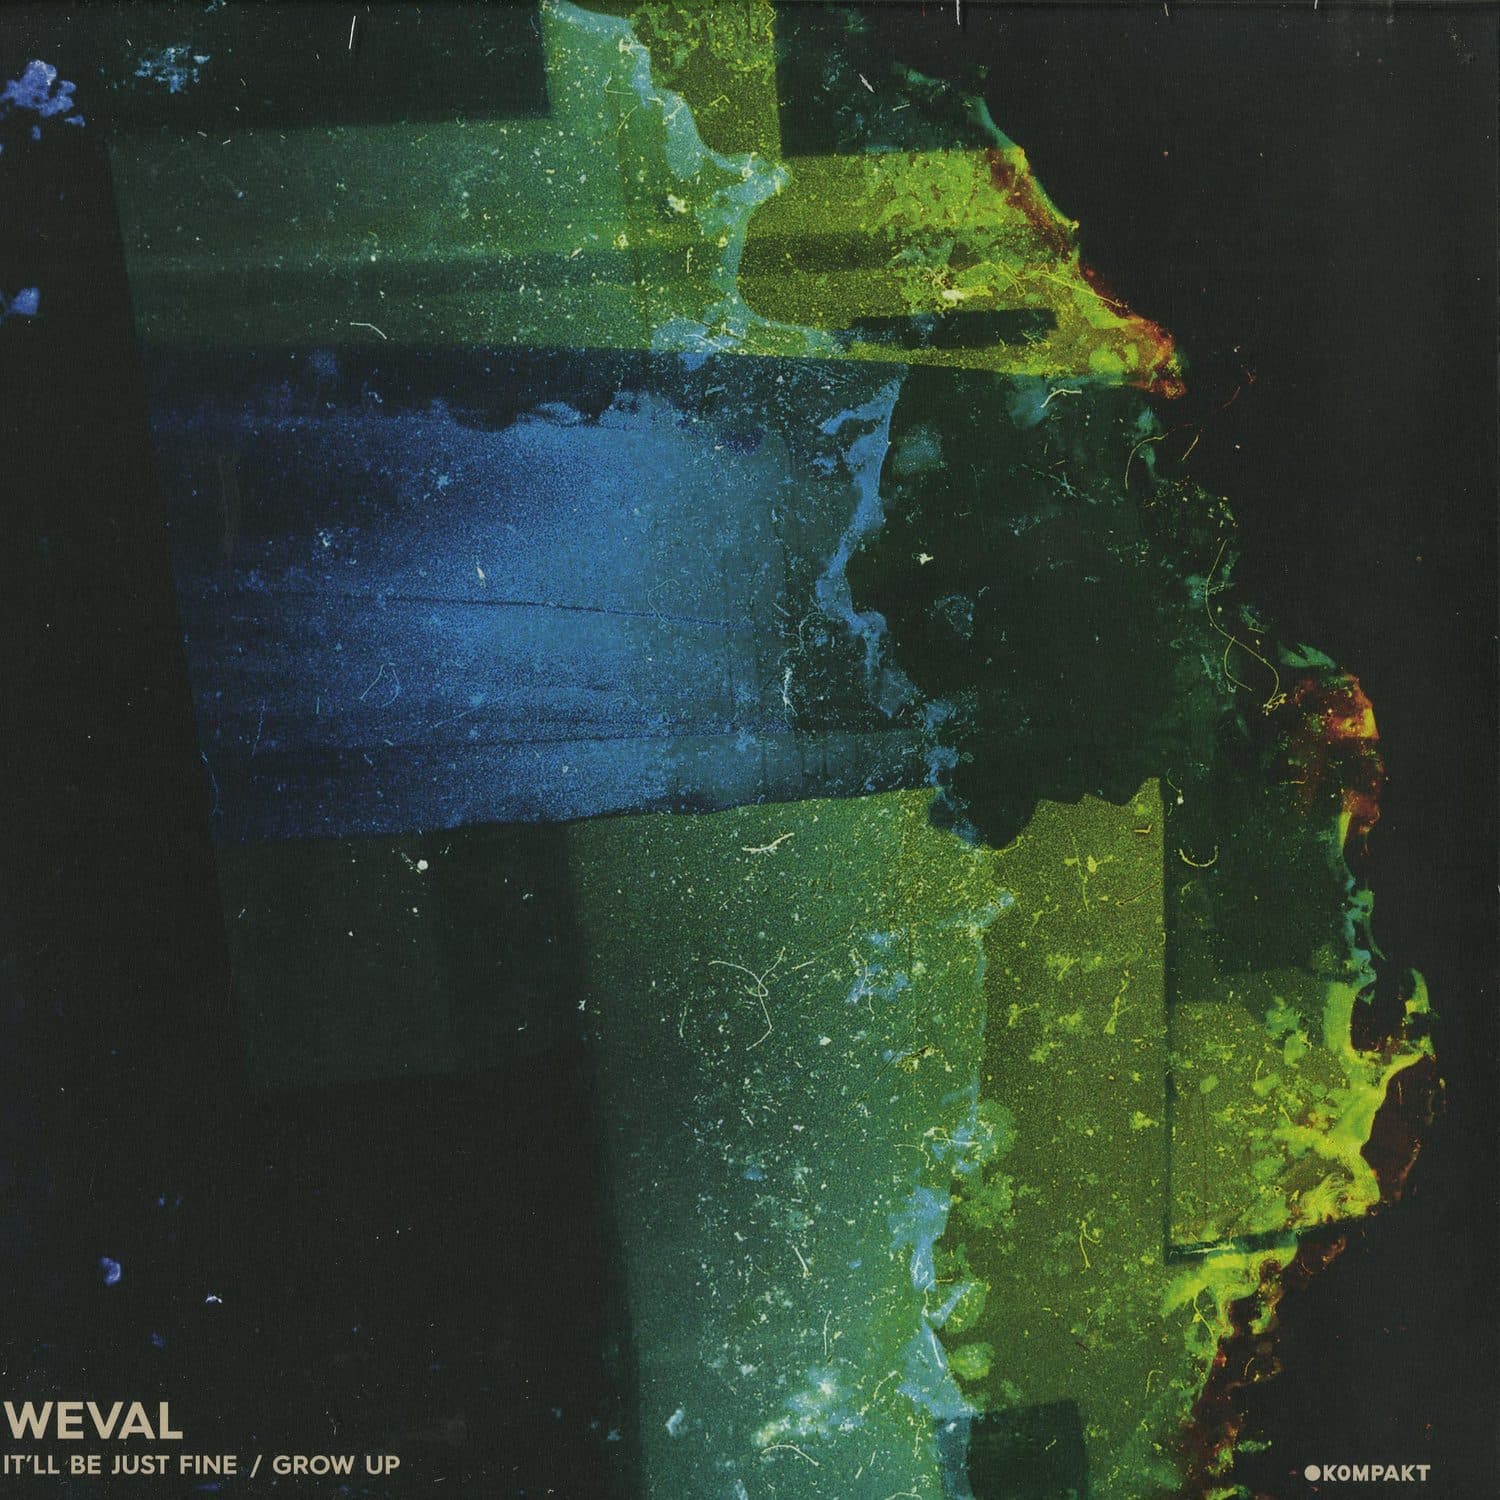 Weval - IT LL BE JUST FINE / GROW UP